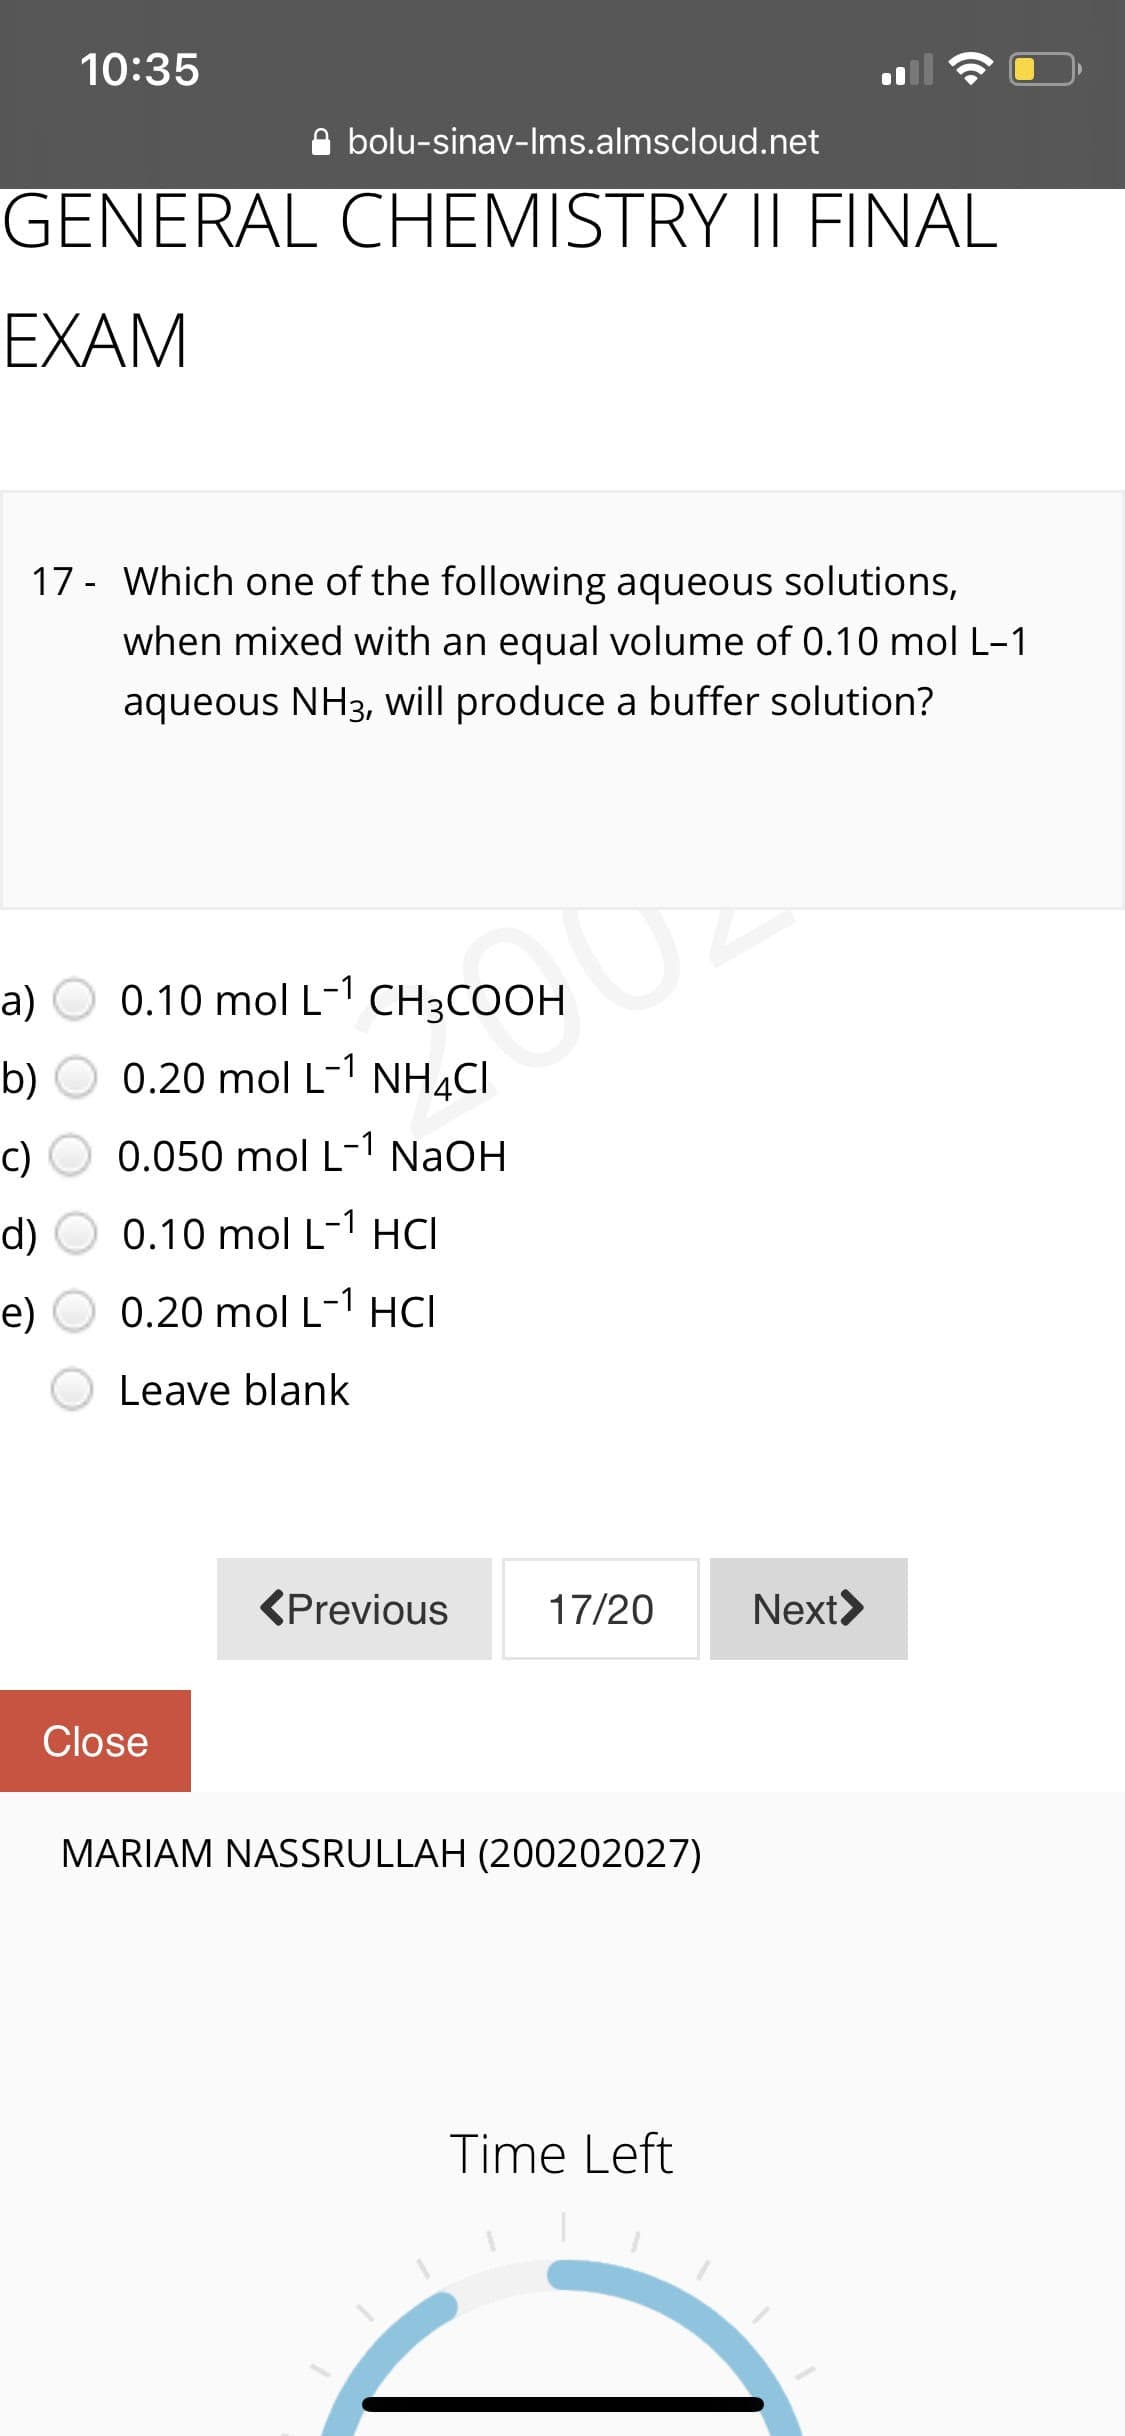 10:35
A bolu-sinav-Ims.almscloud.net
GENERAL CHEMISTRY II FINAL
EXAM
17 - Which one of the following aqueous solutions,
when mixed with an equal volume of 0.10 mol L-1
aqueous NH3, will produce a buffer solution?
a)
0.10 mol L-1 CH3COOH
b)
0.20 mol L-1 NH4CI
c)
0.050 mol L-1 NaOH
d) O 0.10 mol L-1 HCI
e)
0.20 mol L-1 HCI
Leave blank
(Previous
17/20
Next>
Close
MARIAM NASSRULLAH (200202027)
Time Left
